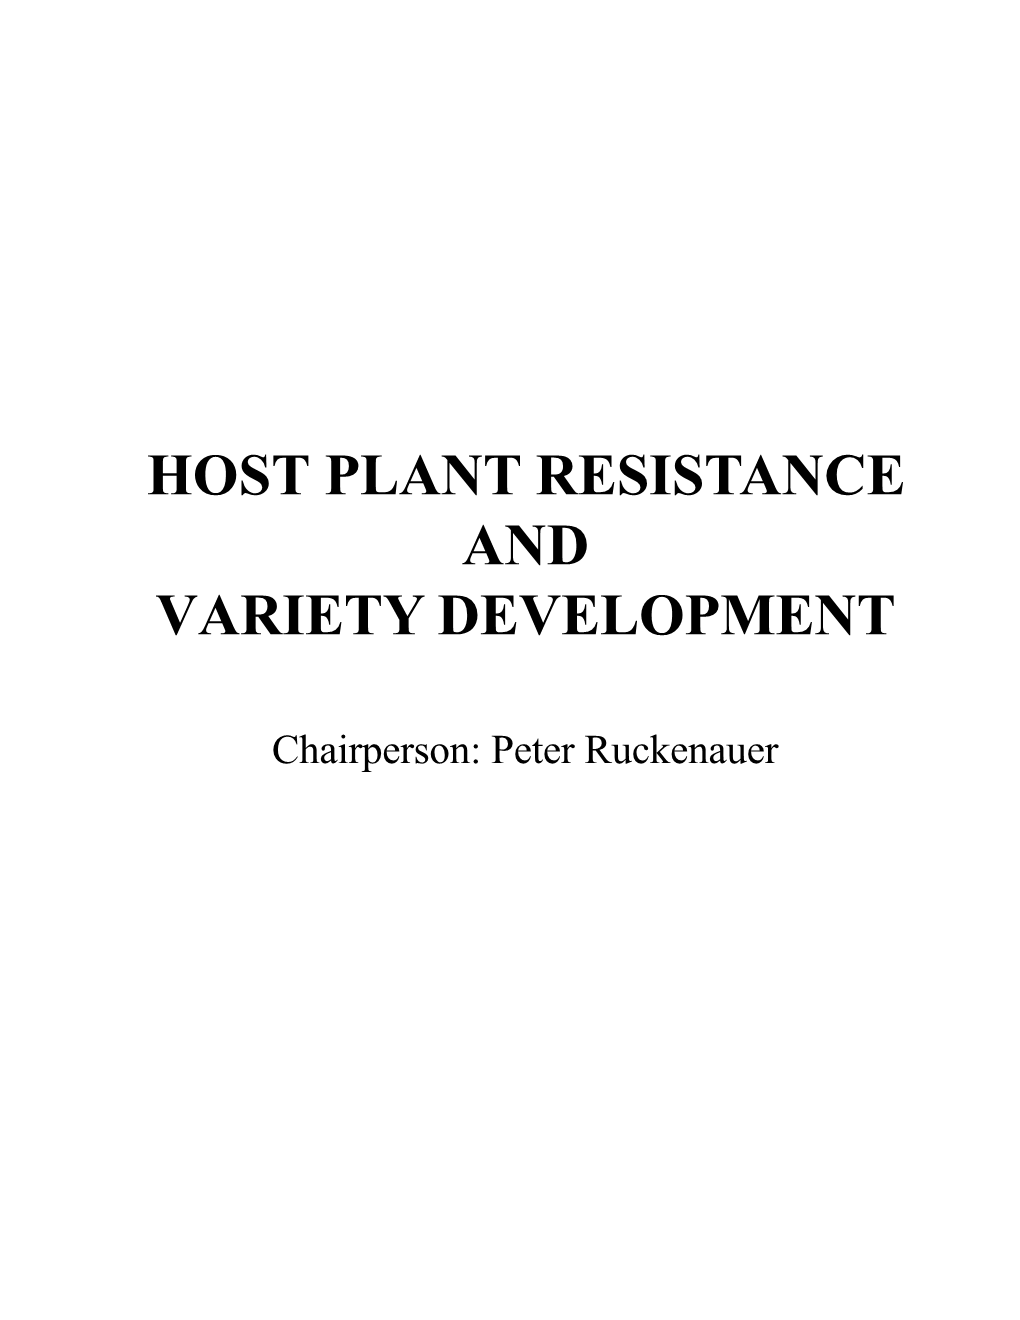 Host Plant Resistance and Variety Development